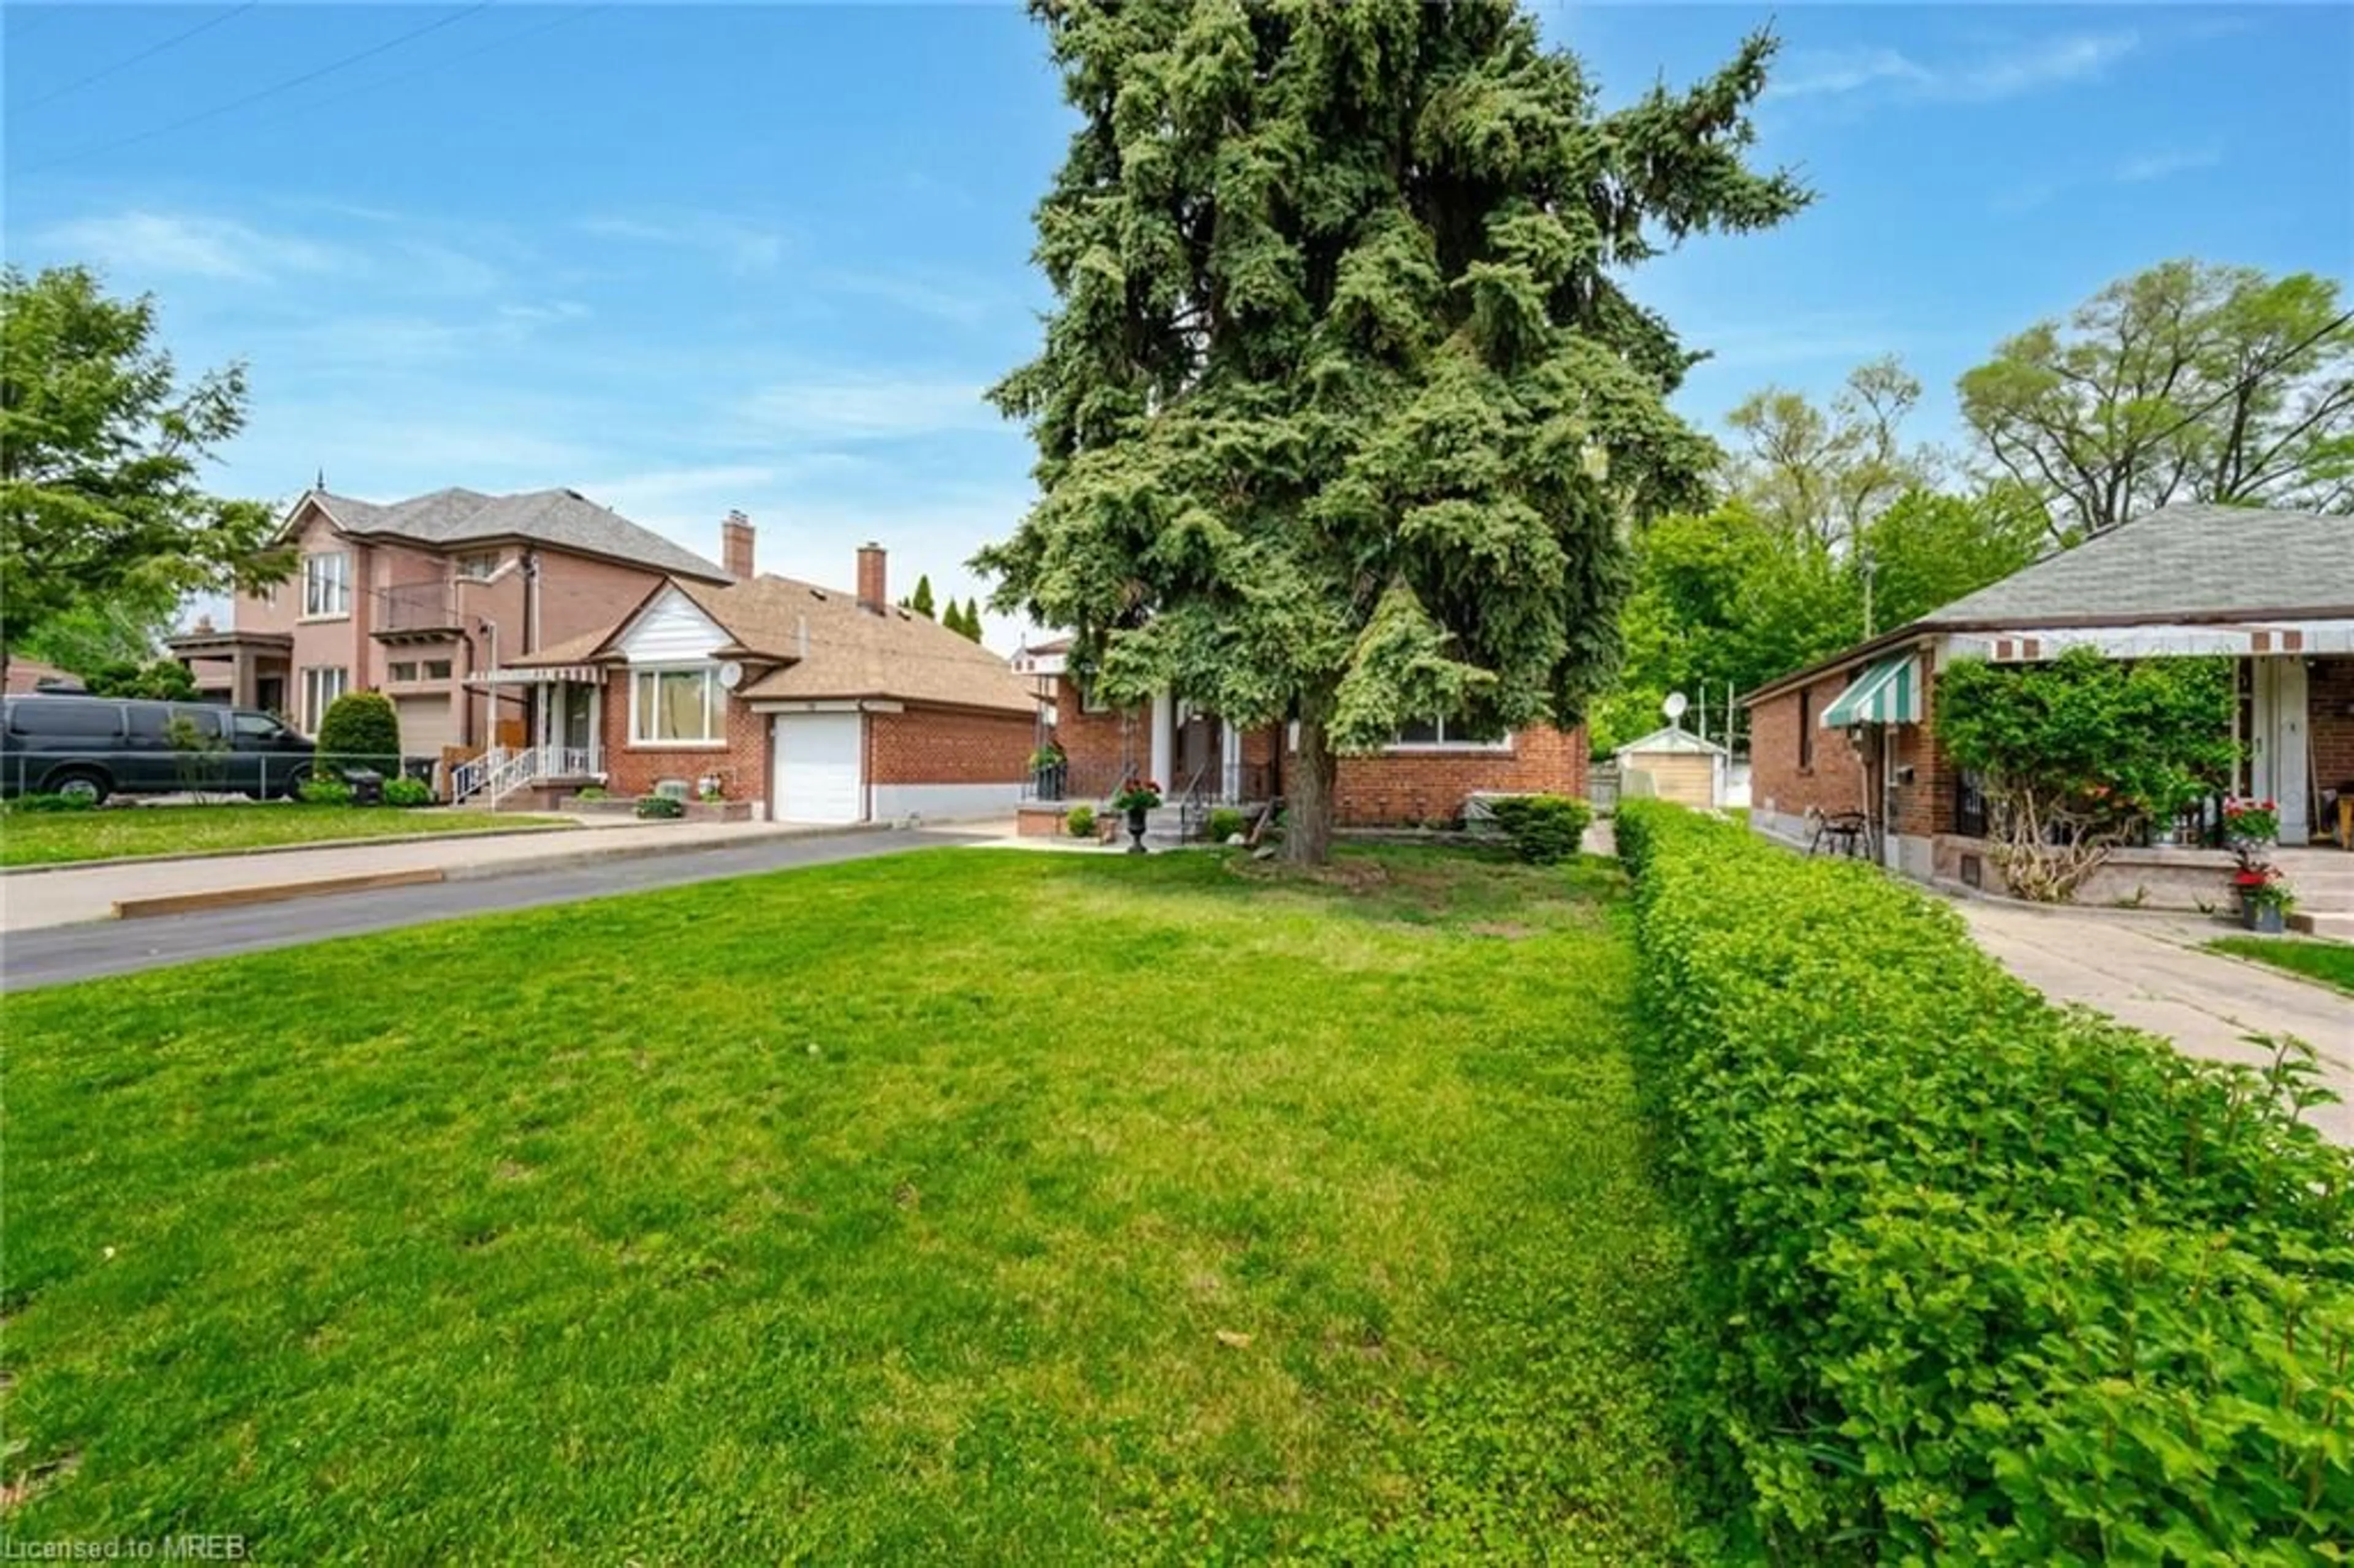 Fenced yard for 76 Cannon Rd, Toronto Ontario M8Y 1S1